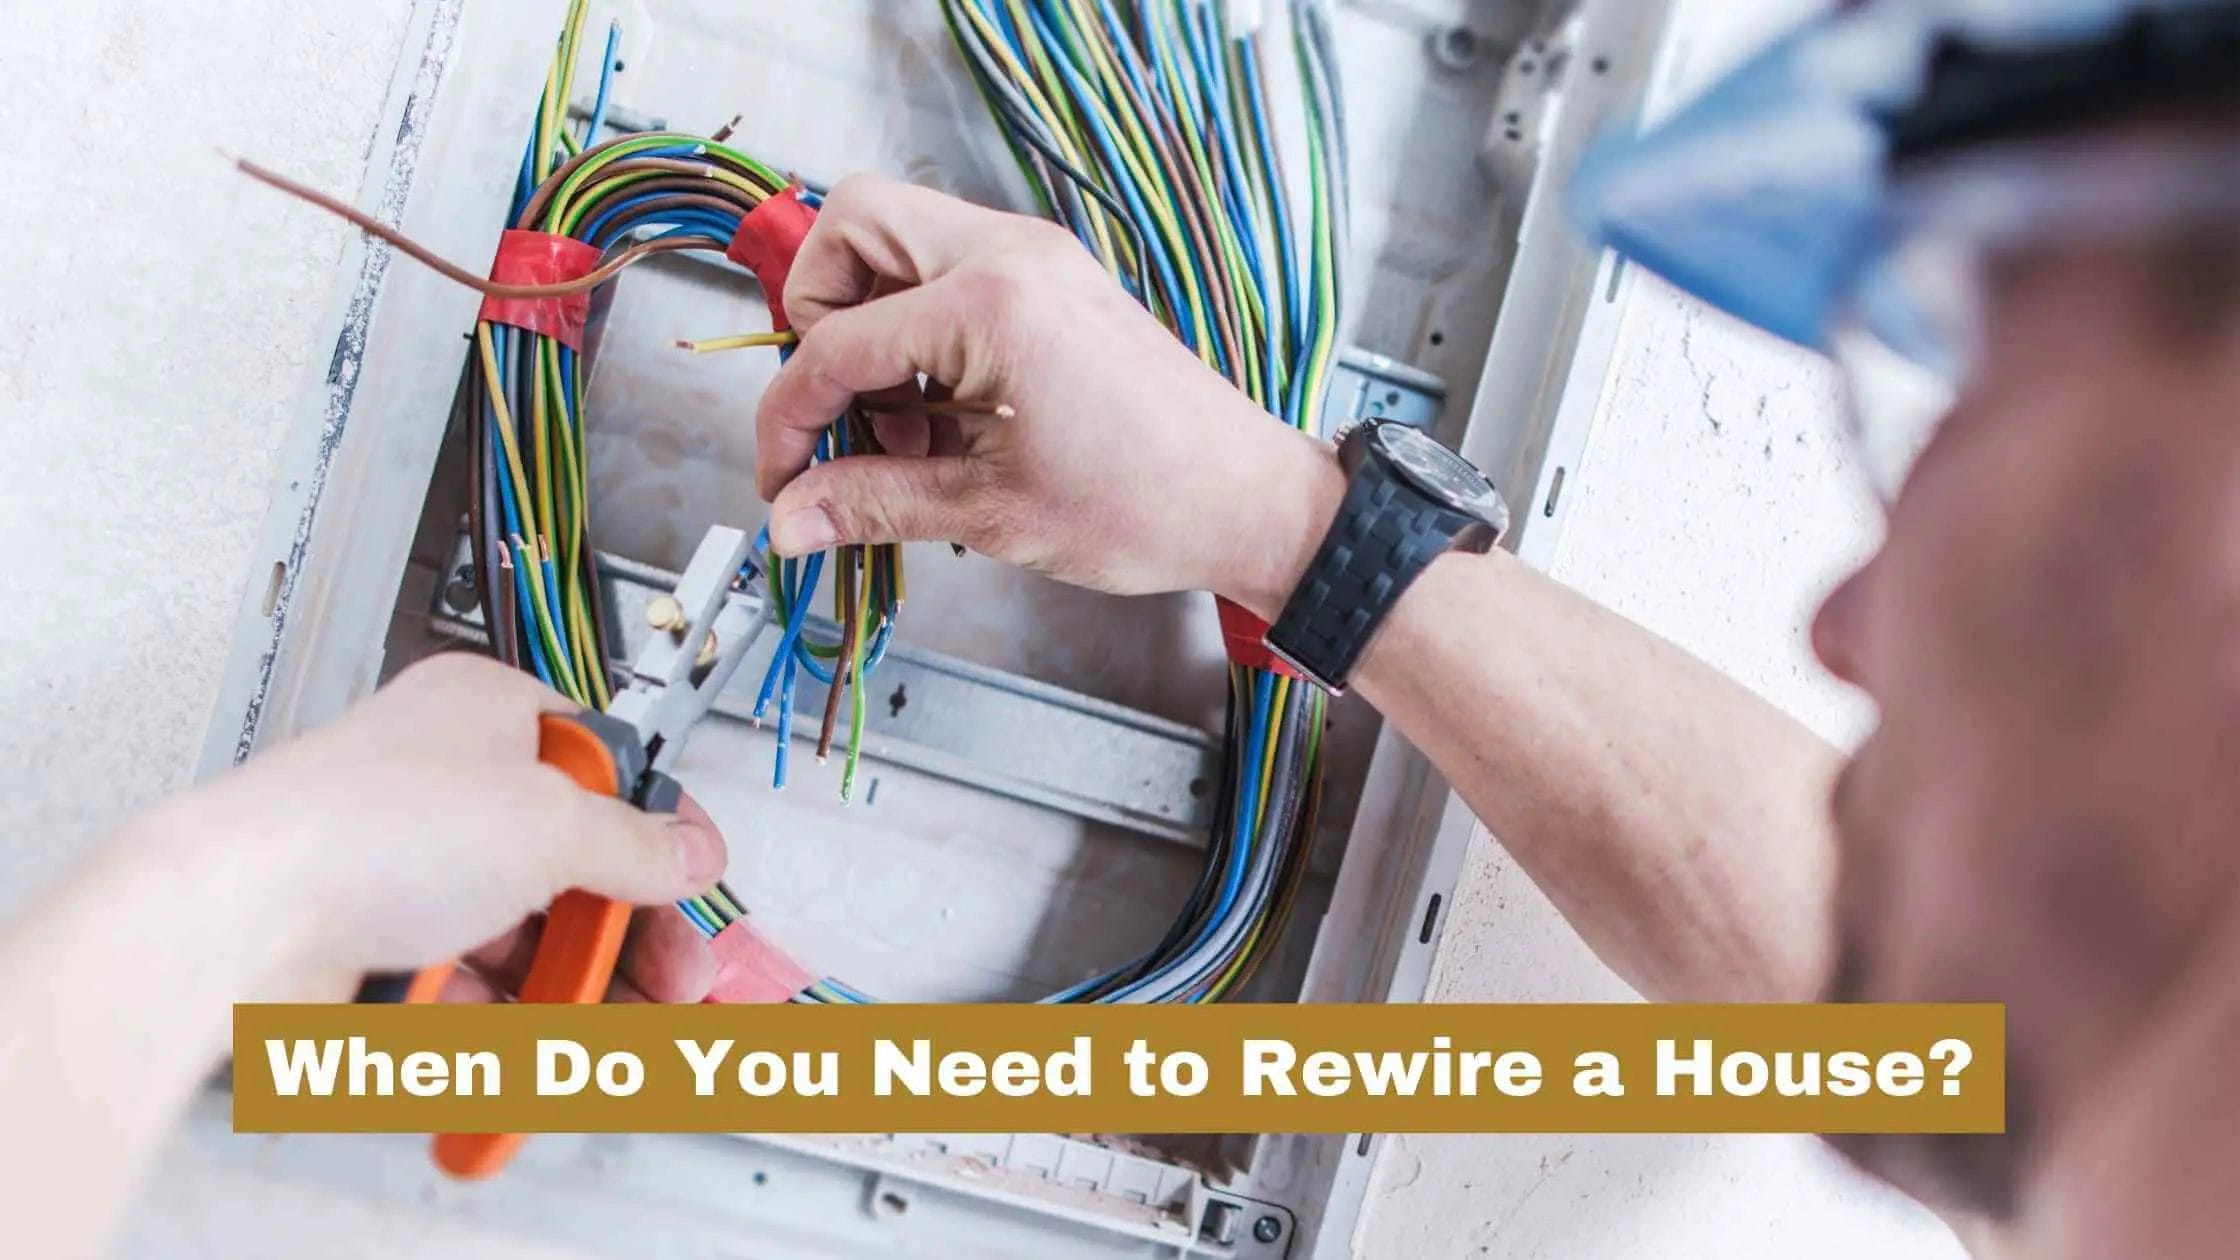 When Do You Need to Rewire a House